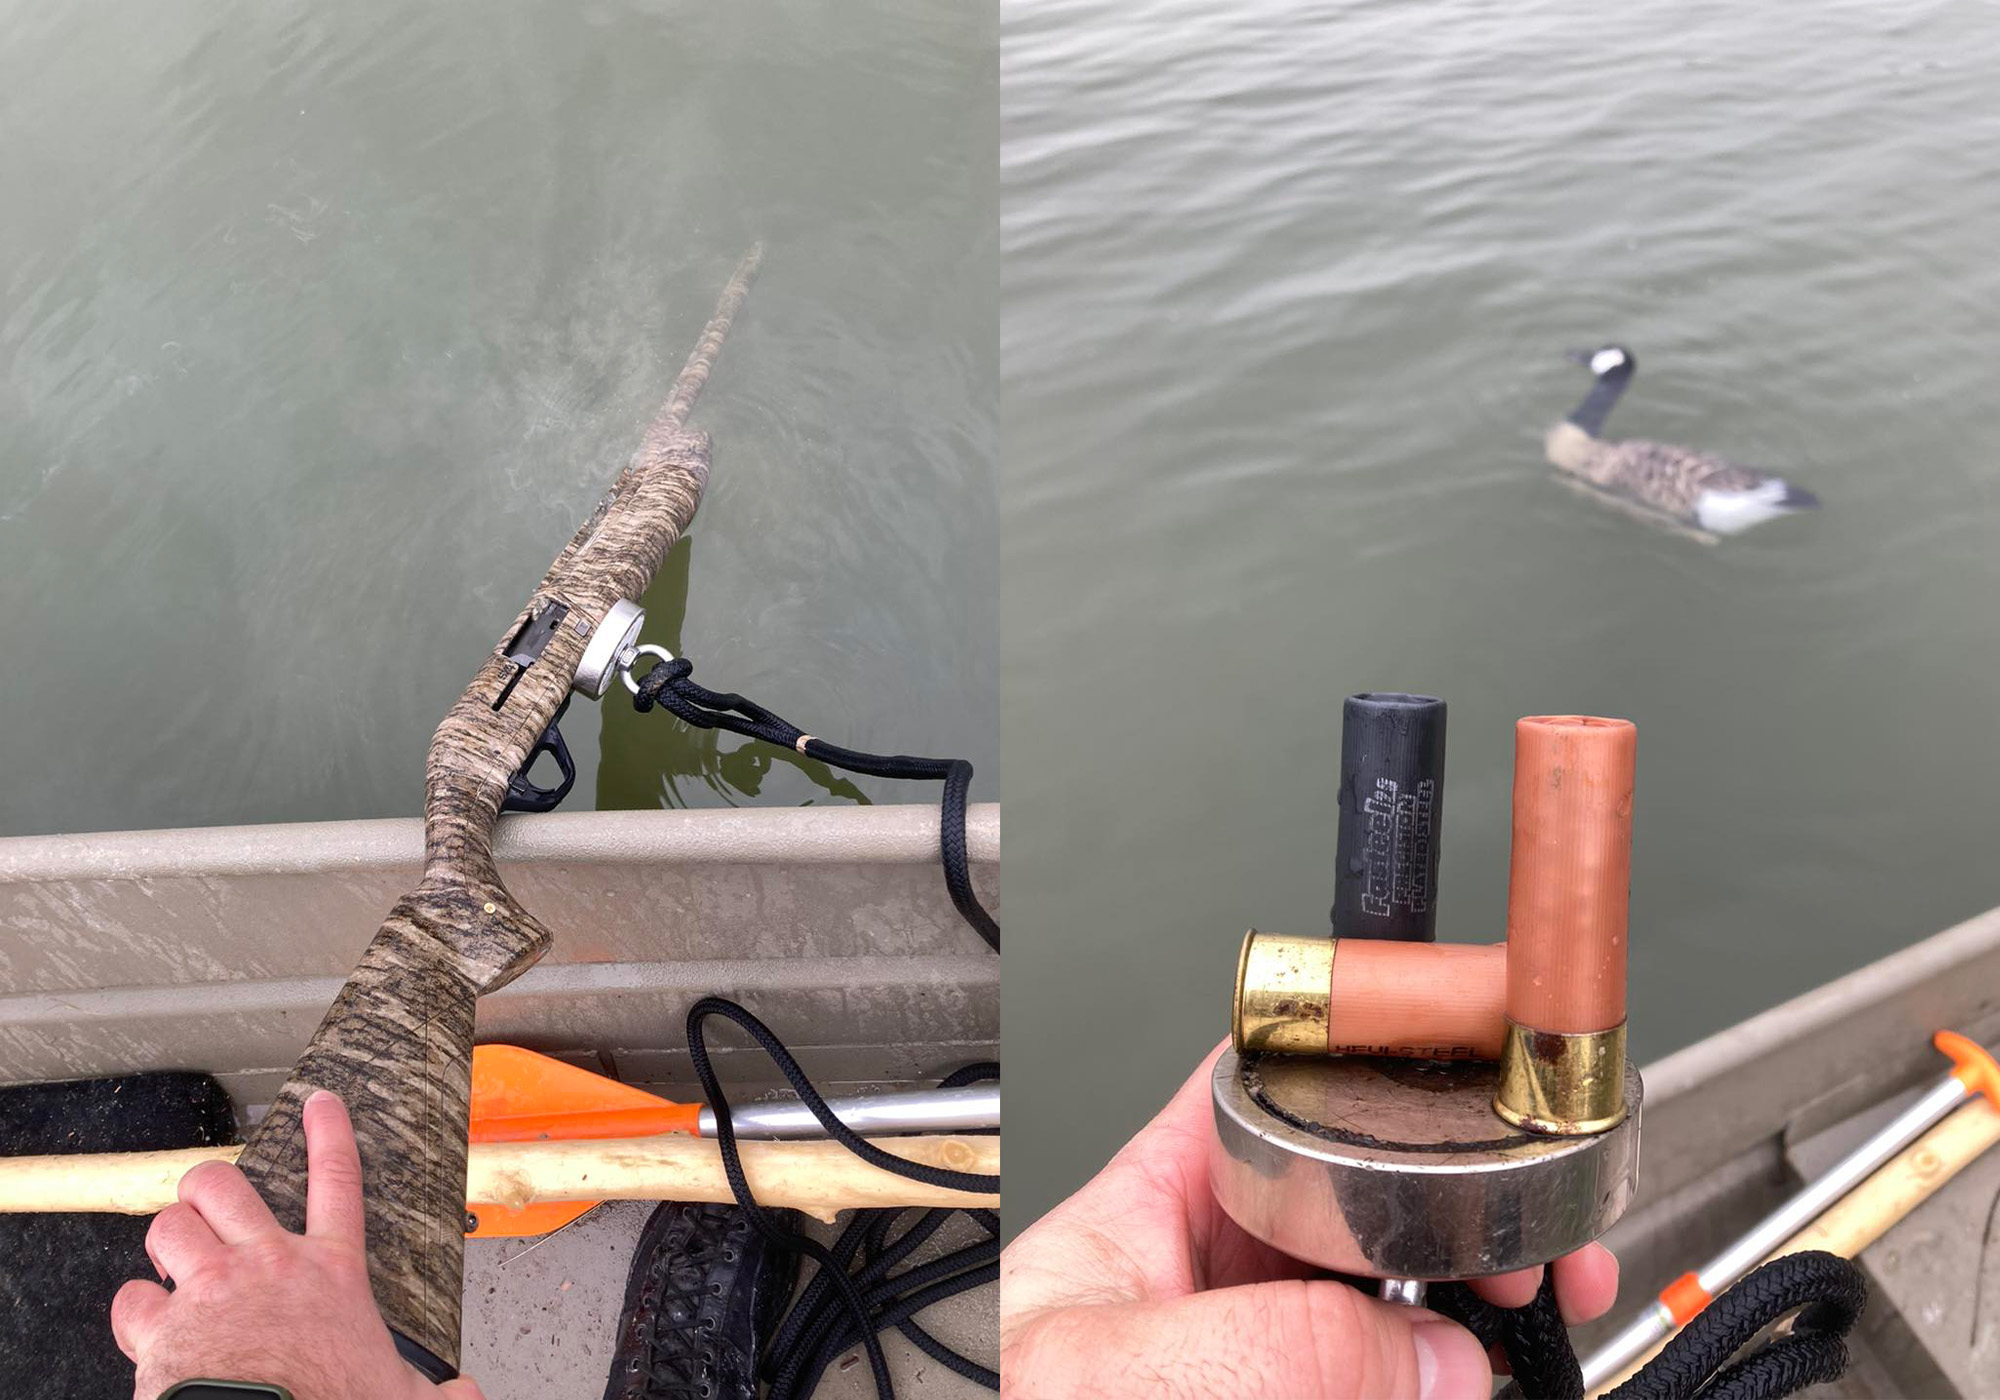 After Duck Hunters Flip Their Kayaks, Indiana Game Warden Recovers Shotguns with a Magnet